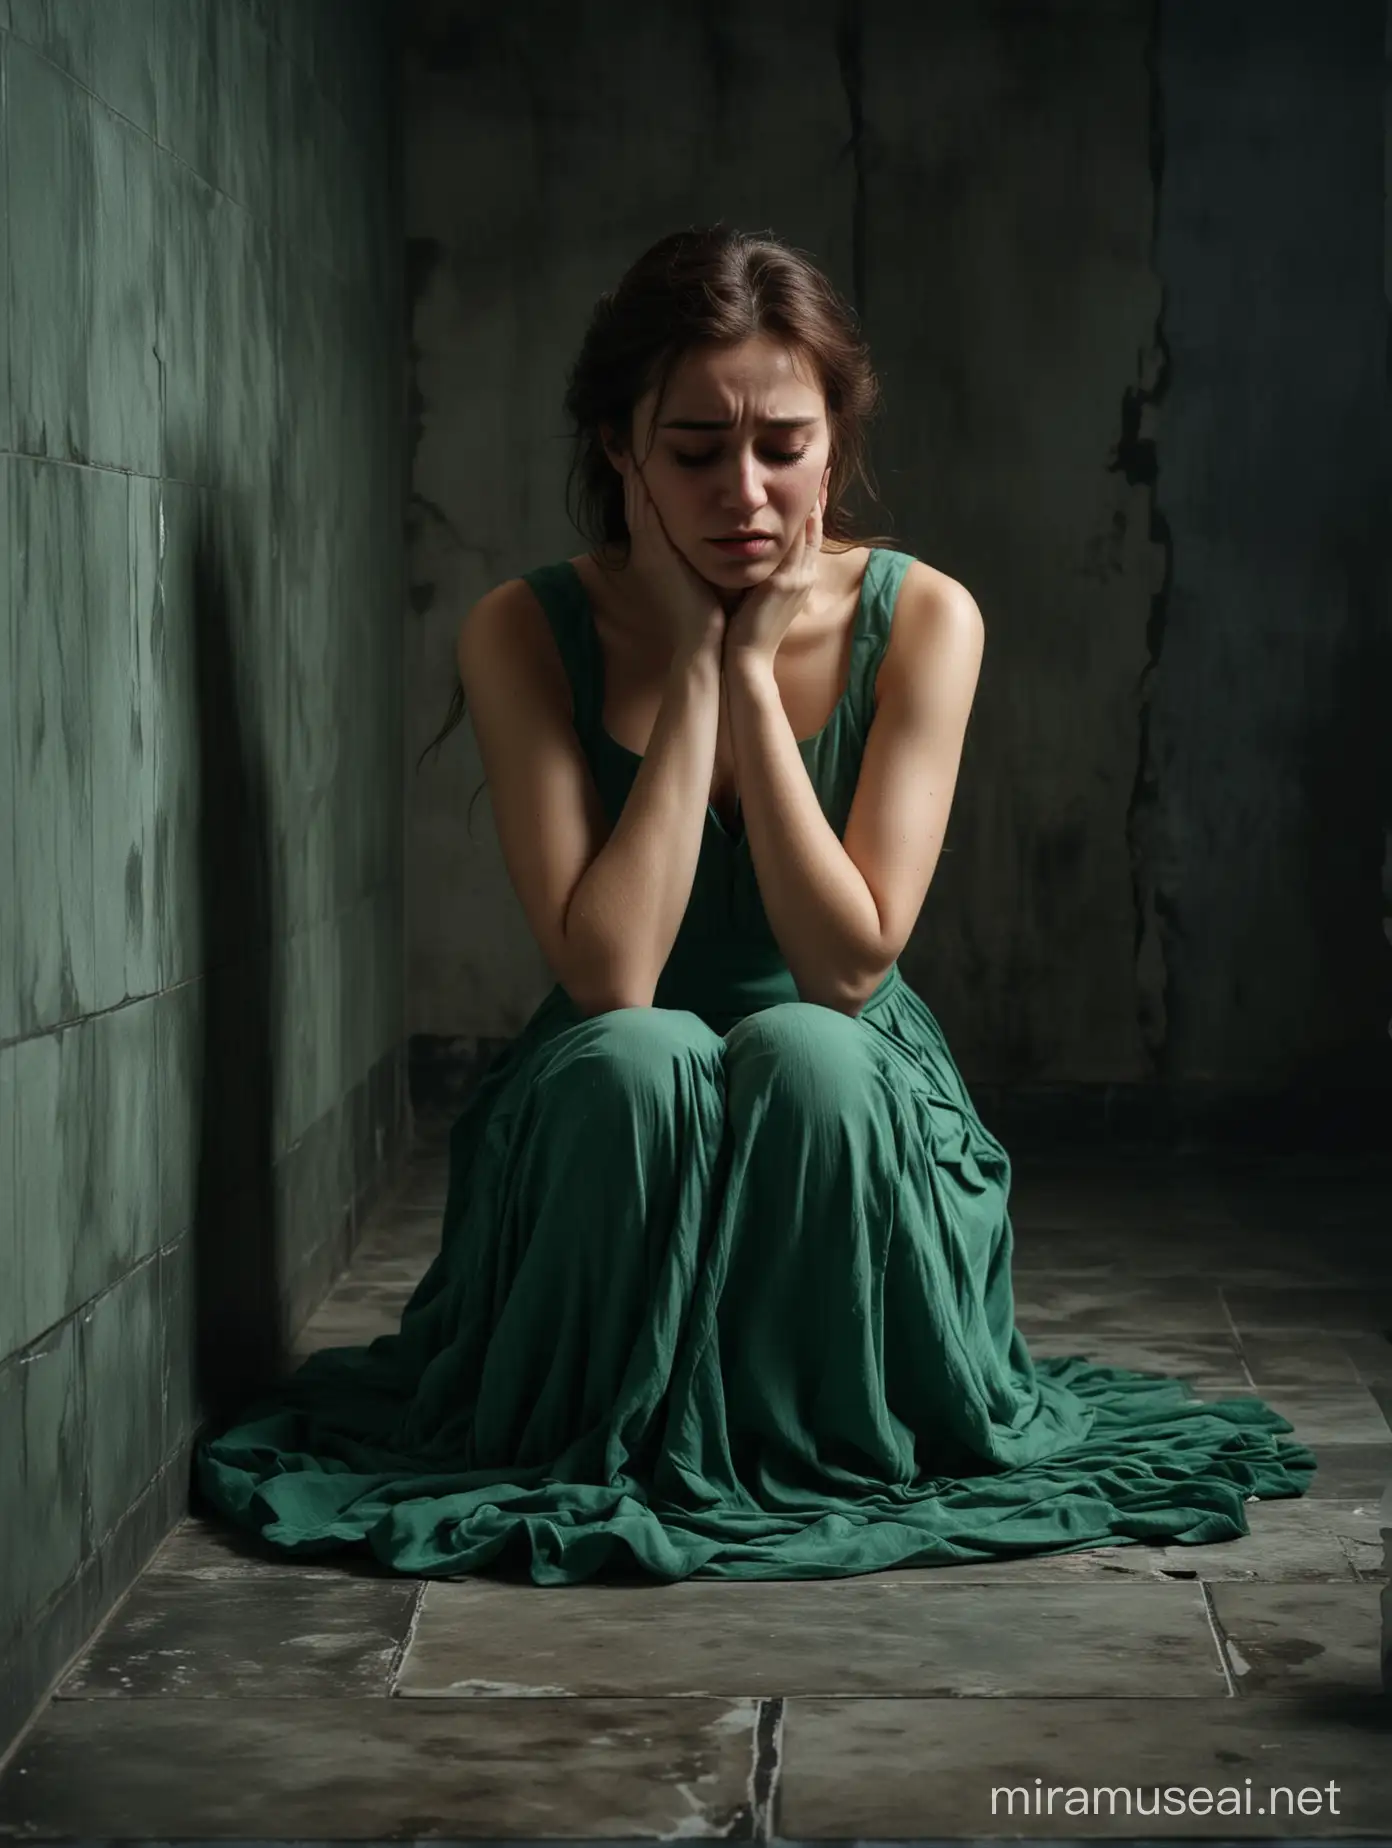 A sad beautiful lady in green dress sitting on the cold tiles in a dark room, crying bitterly